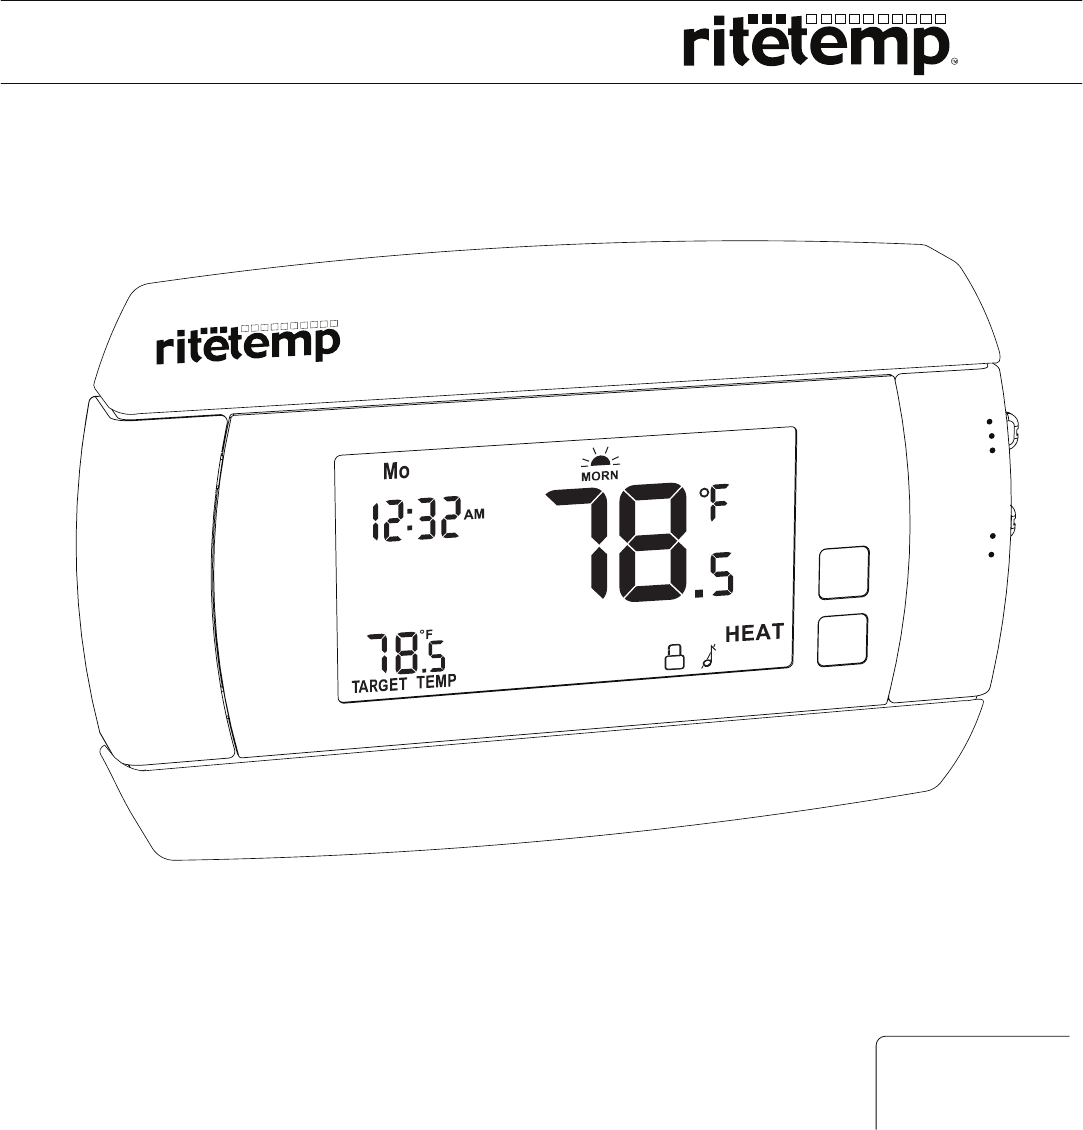 How do you use a RiteTemp 6030 thermostat?